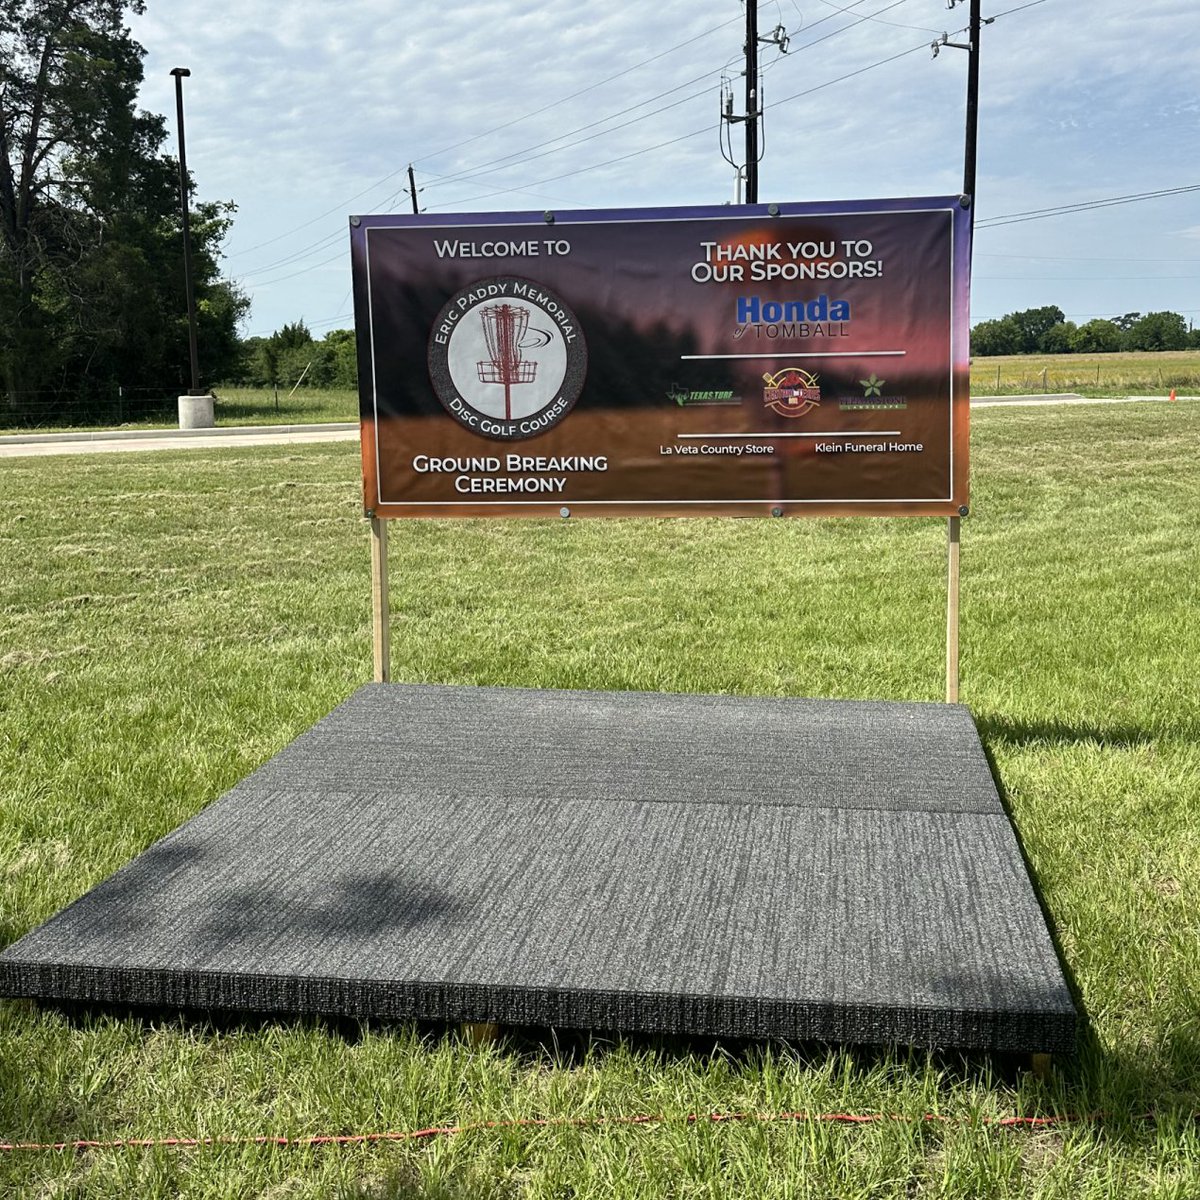 We are honored to sponsor the new Eric Paddy Memorial Disc Golf Course located at @GBCTomball!

#ilovepohanka #hondaoftomball #ericpaddymemorialdiscgolfcourse #frisbeegolf #discgolf #discgolfcourse #tomball  #epmdgc #epmdiscgolf #endcancer